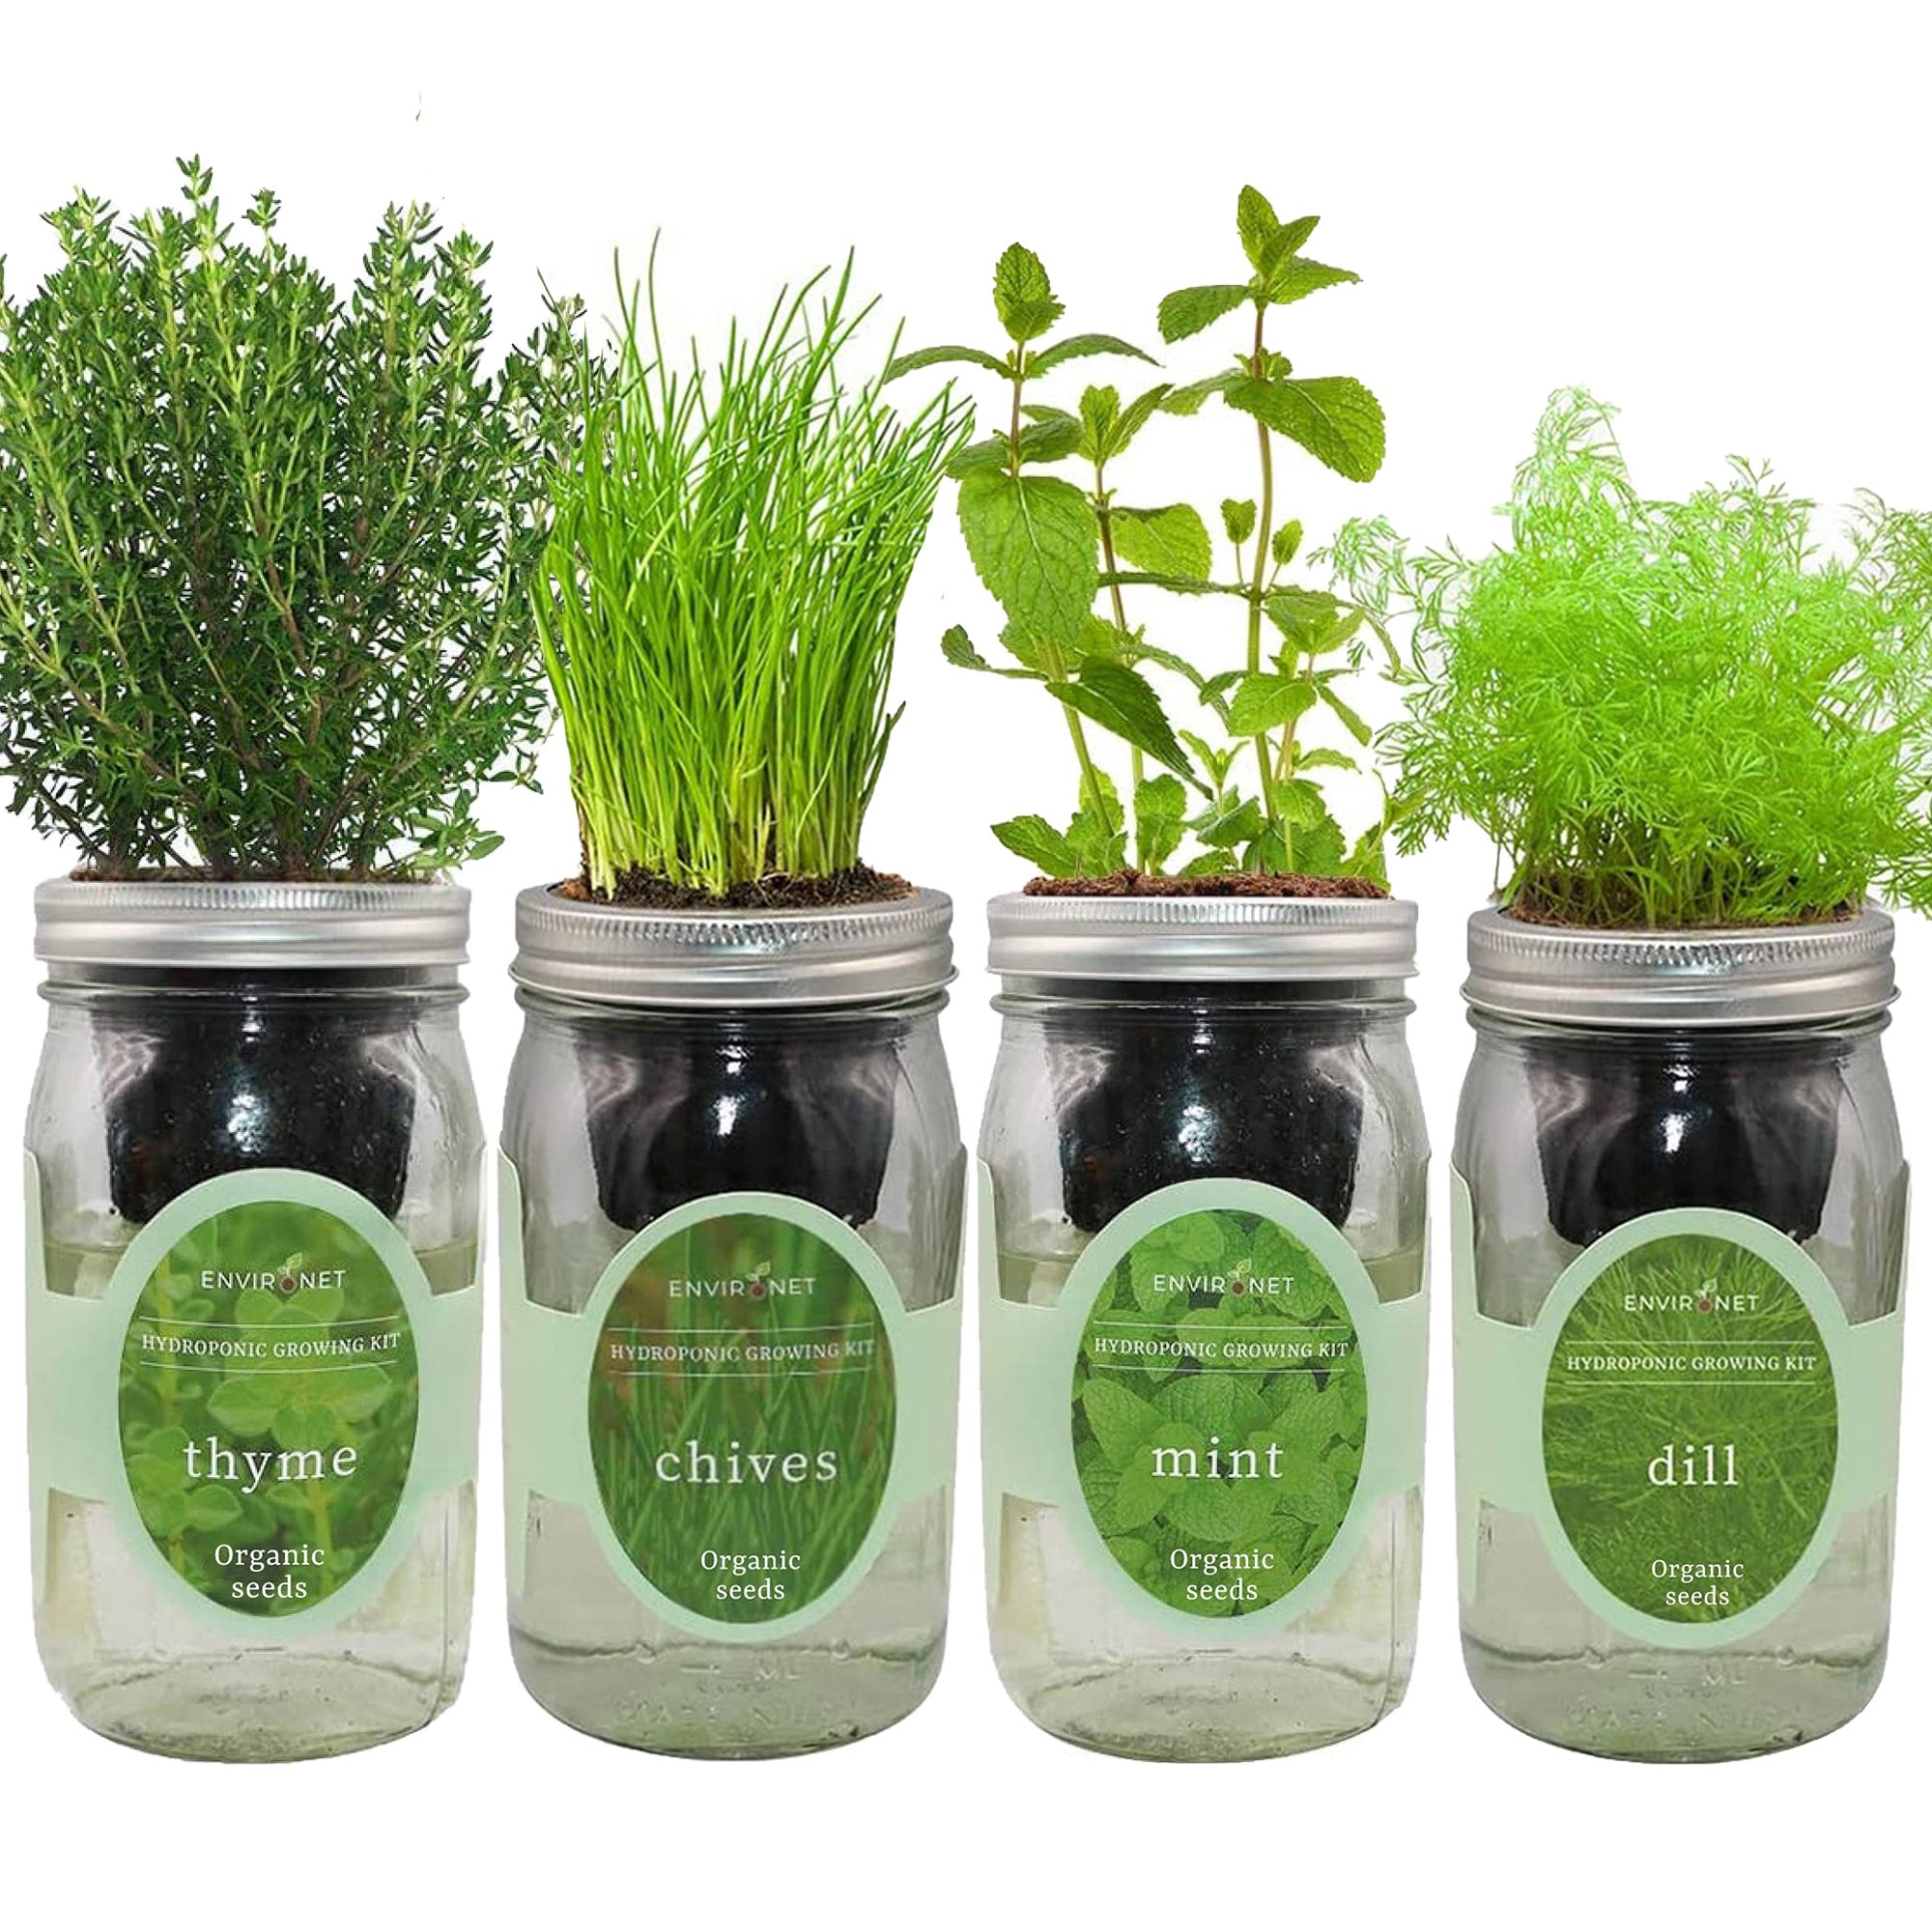 Hydroponic Herb Growing Garden Bundle with Organic Seeds - Mint,Thyme,Chives, Dill